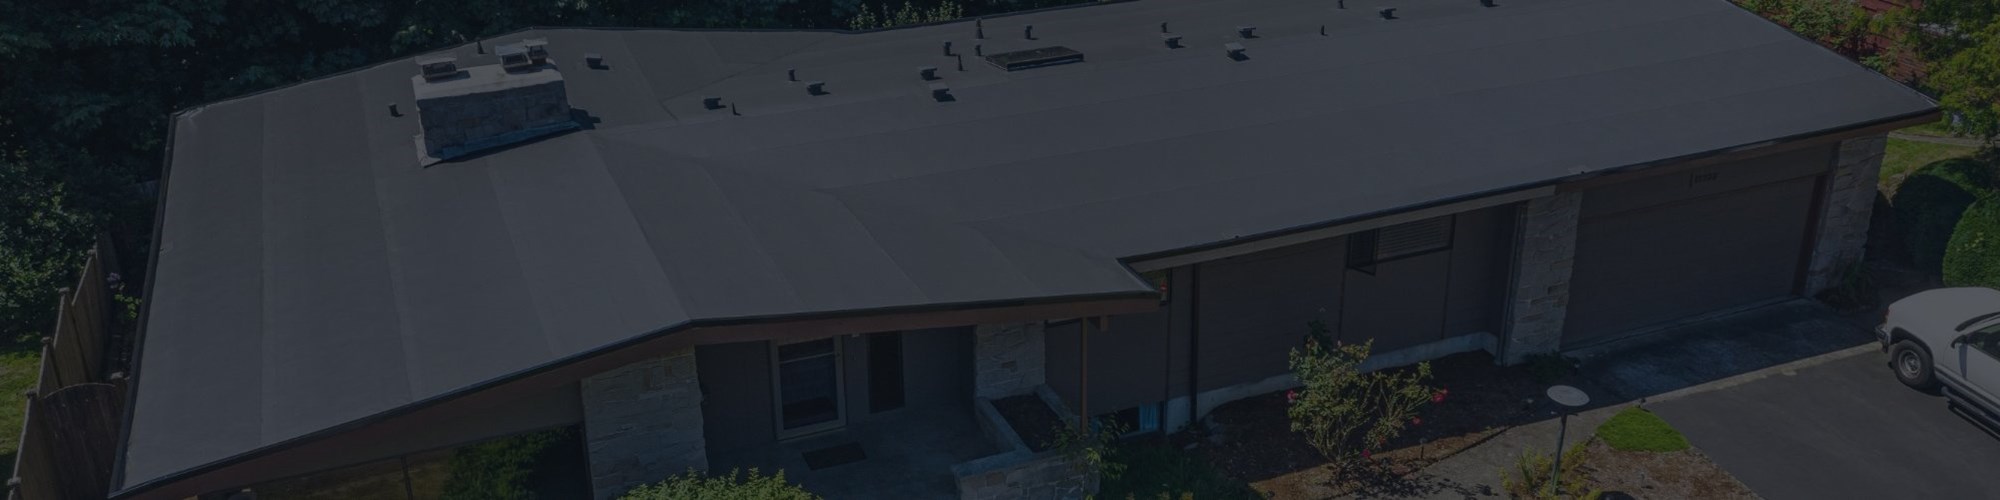 Flat roofing project gallery